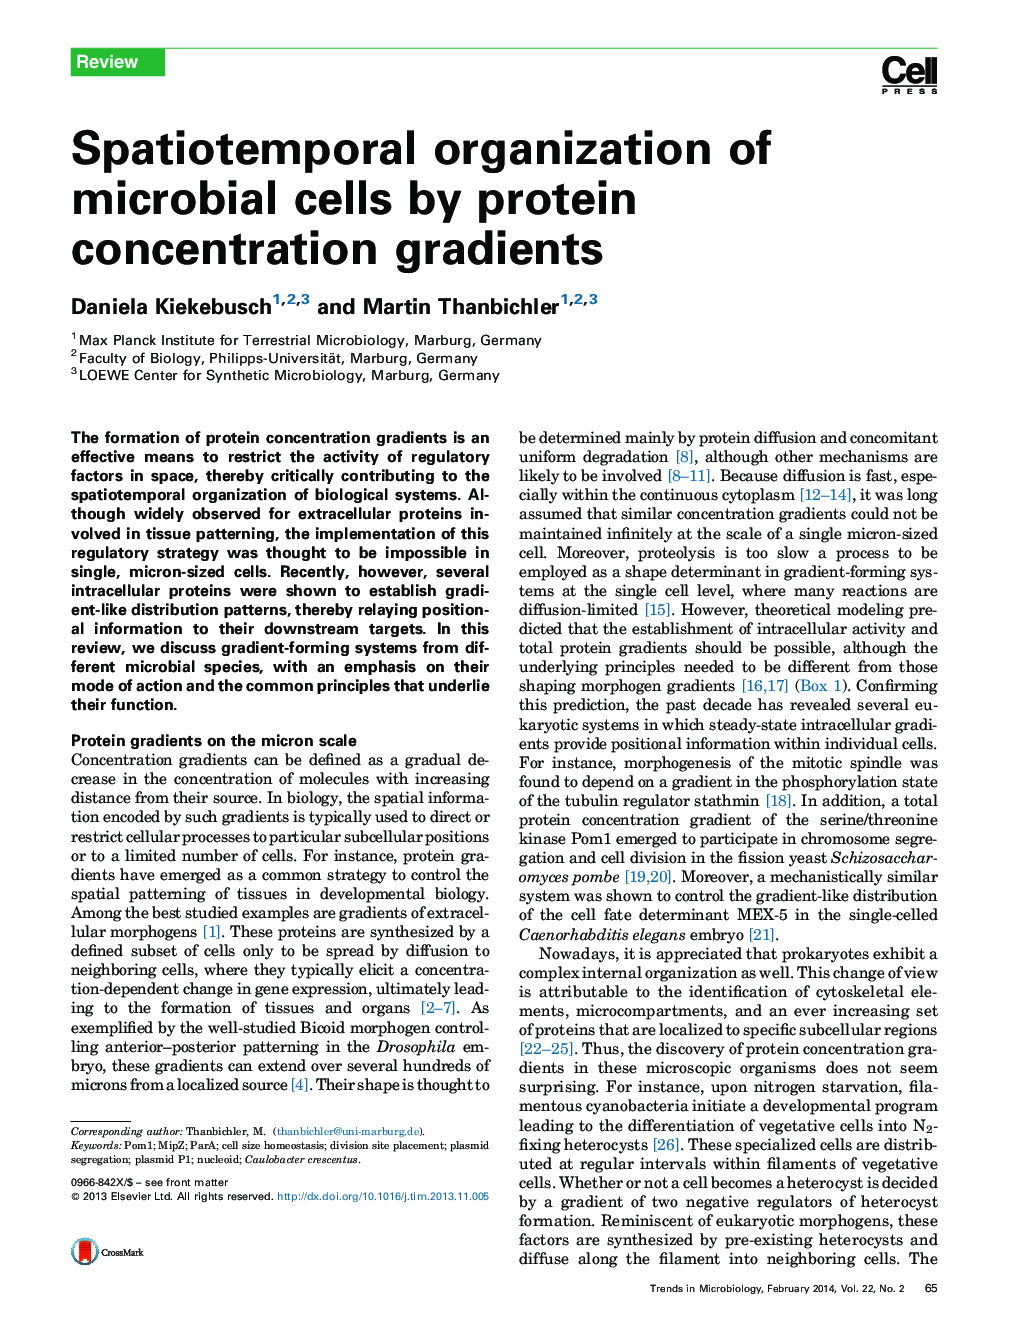 Spatiotemporal organization of microbial cells by protein concentration gradients